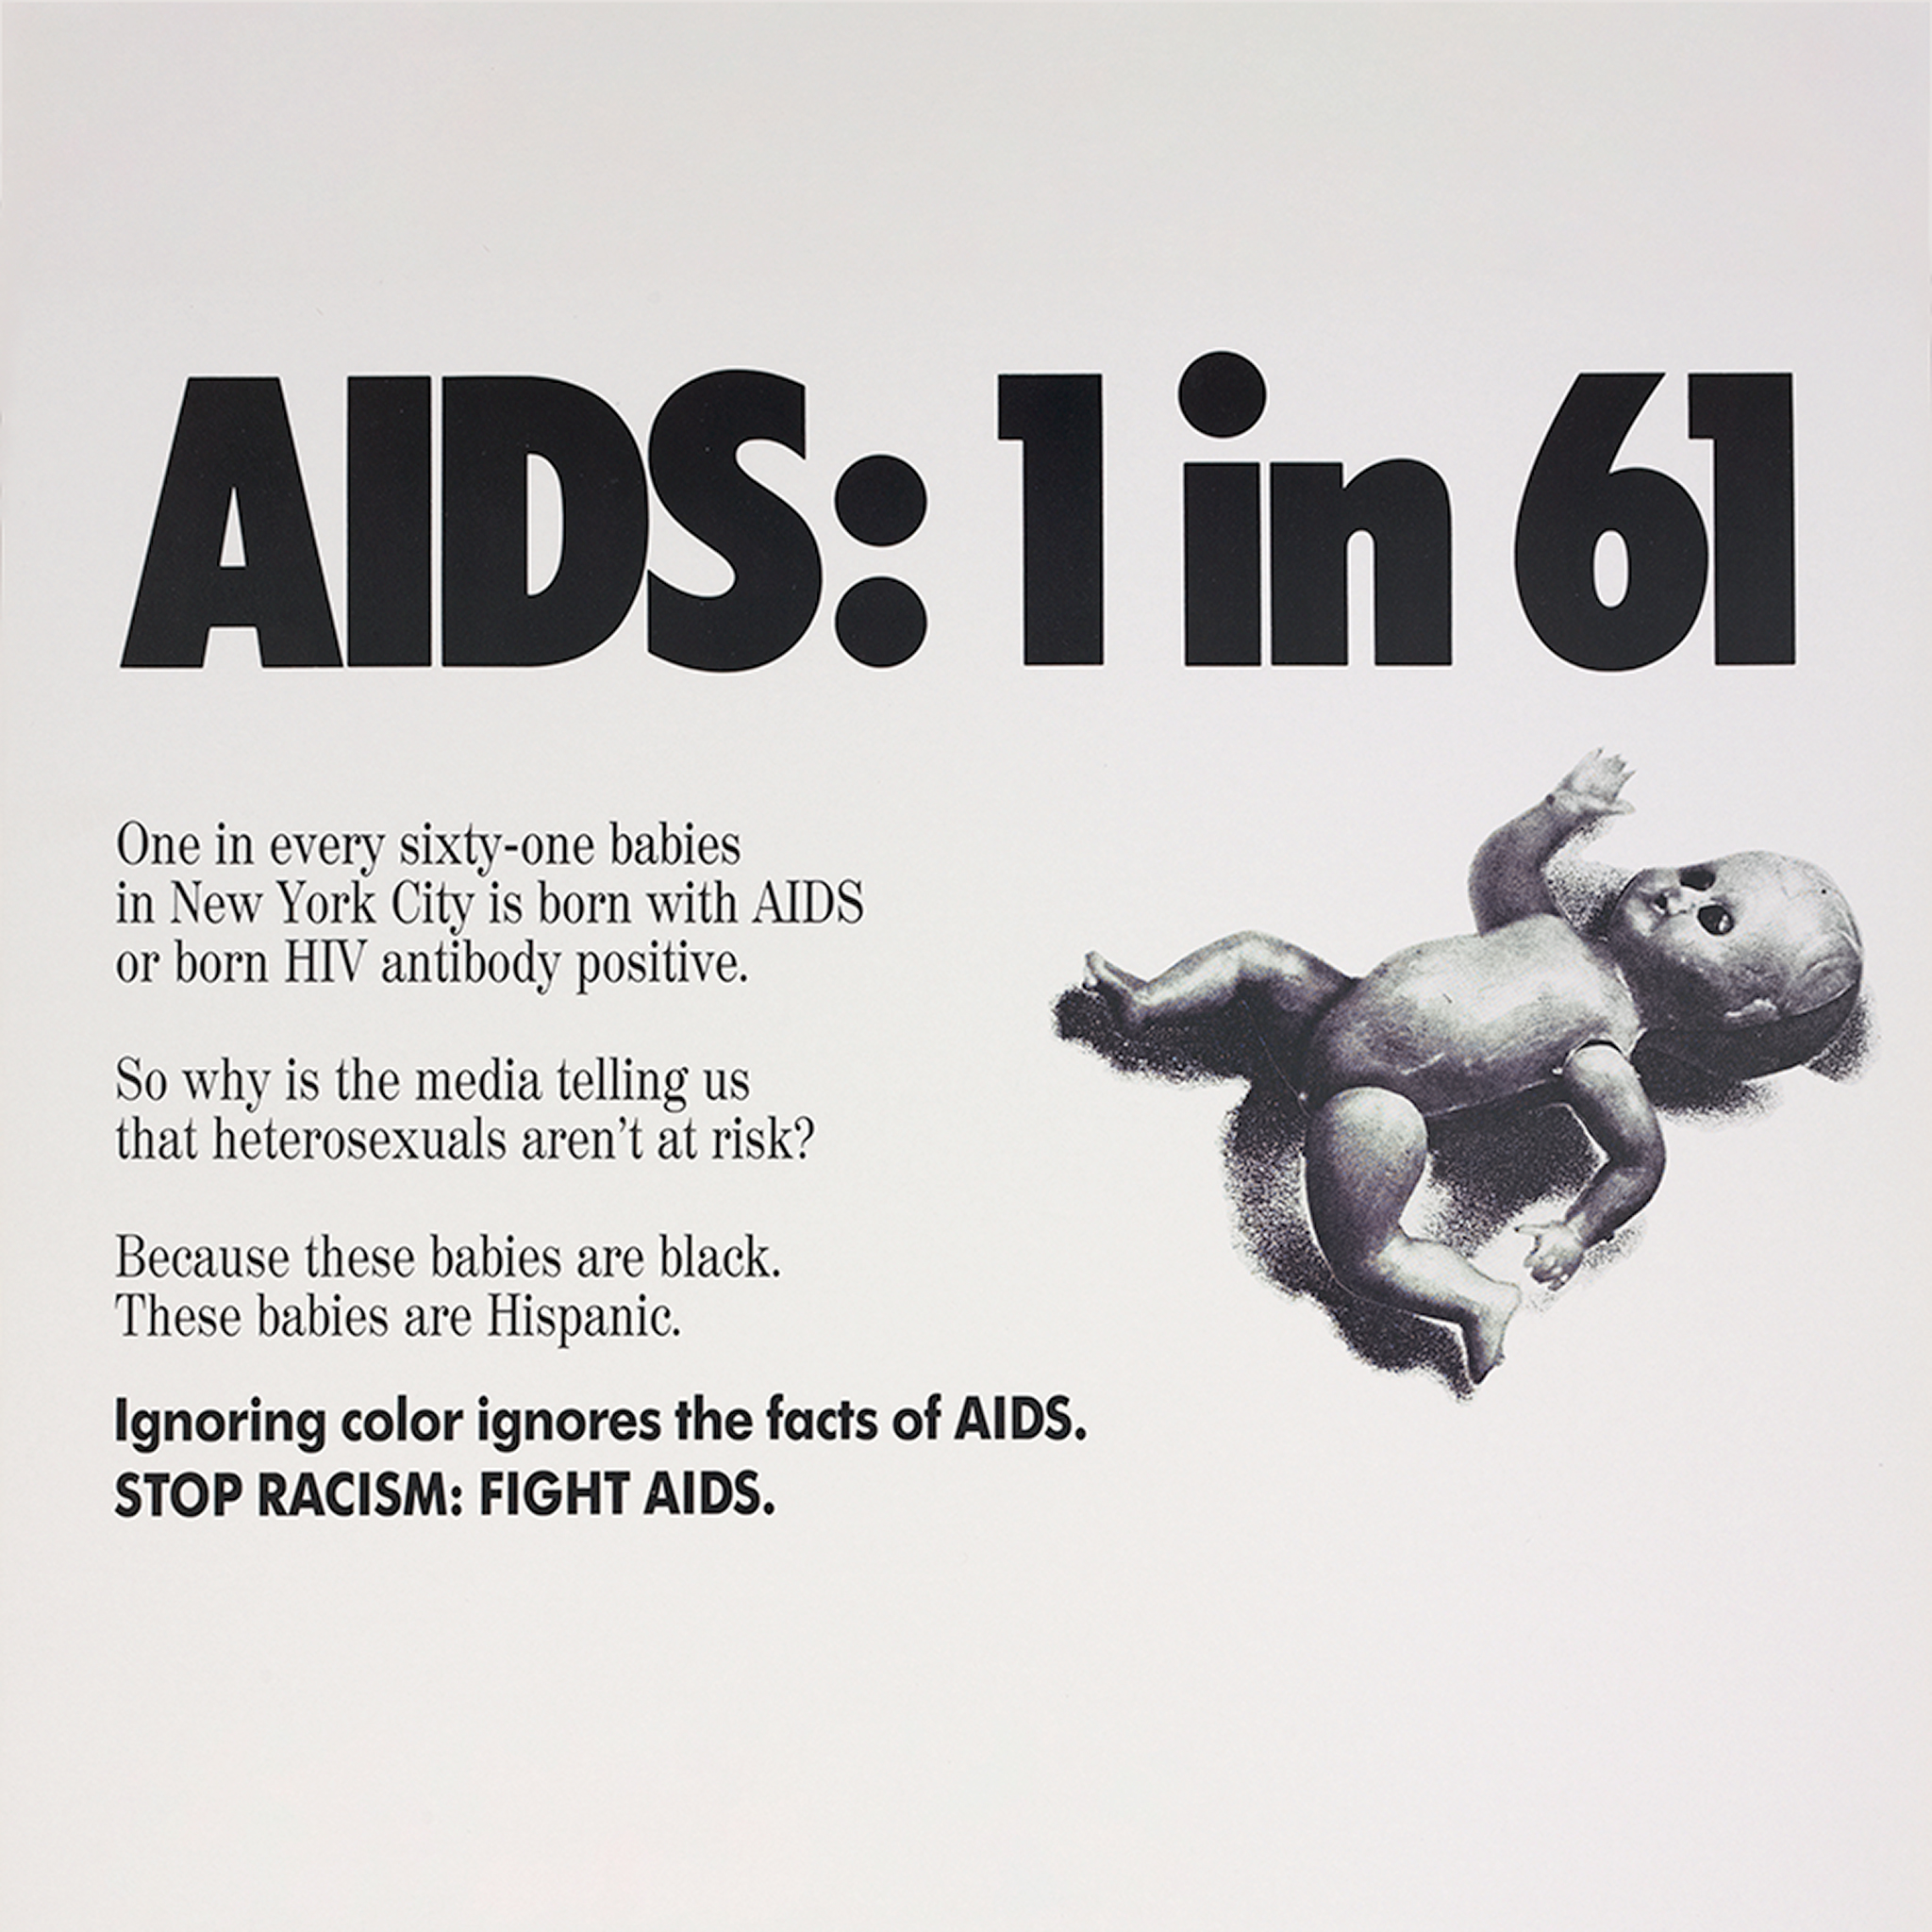 Black-and-white poster with a bold statistic about AIDS, an image of a baby doll, and accompanying text about HIV/AIDS in babies.